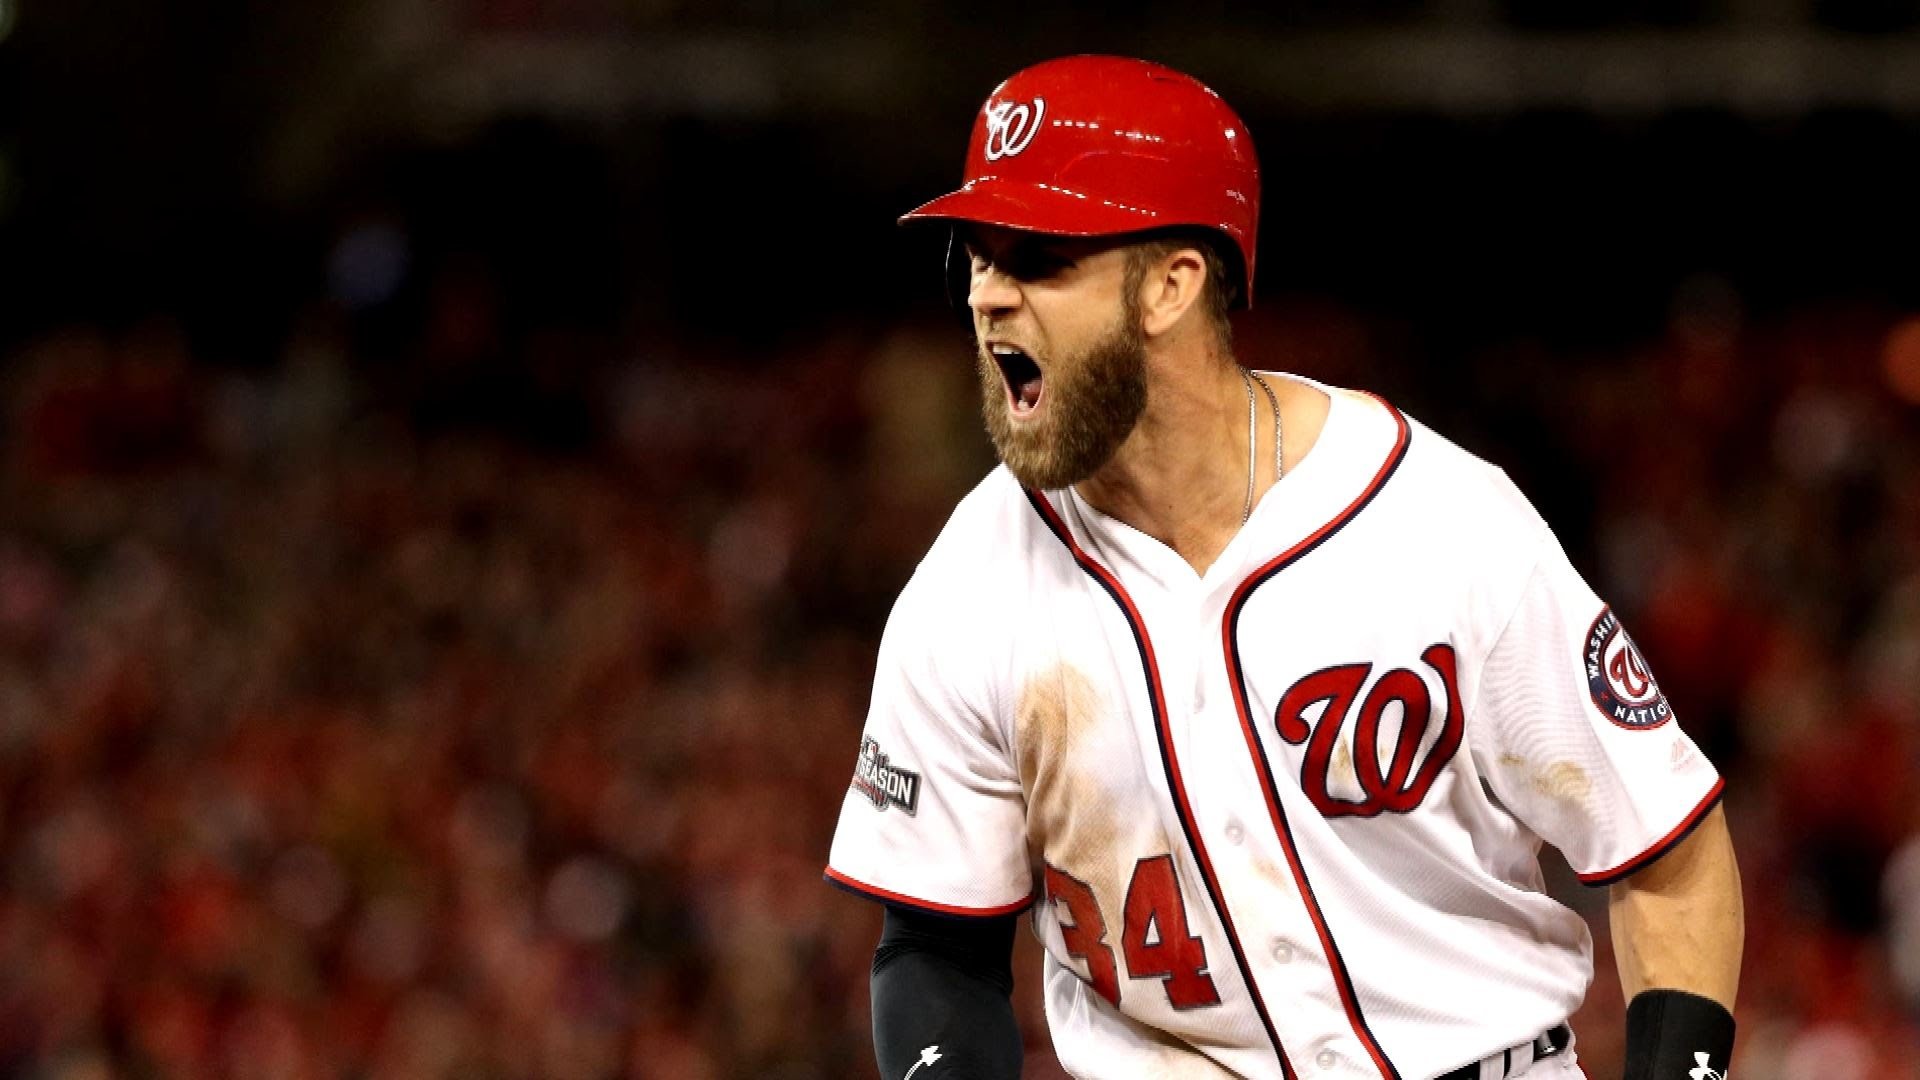 Is Bryce Harper worth his asking price